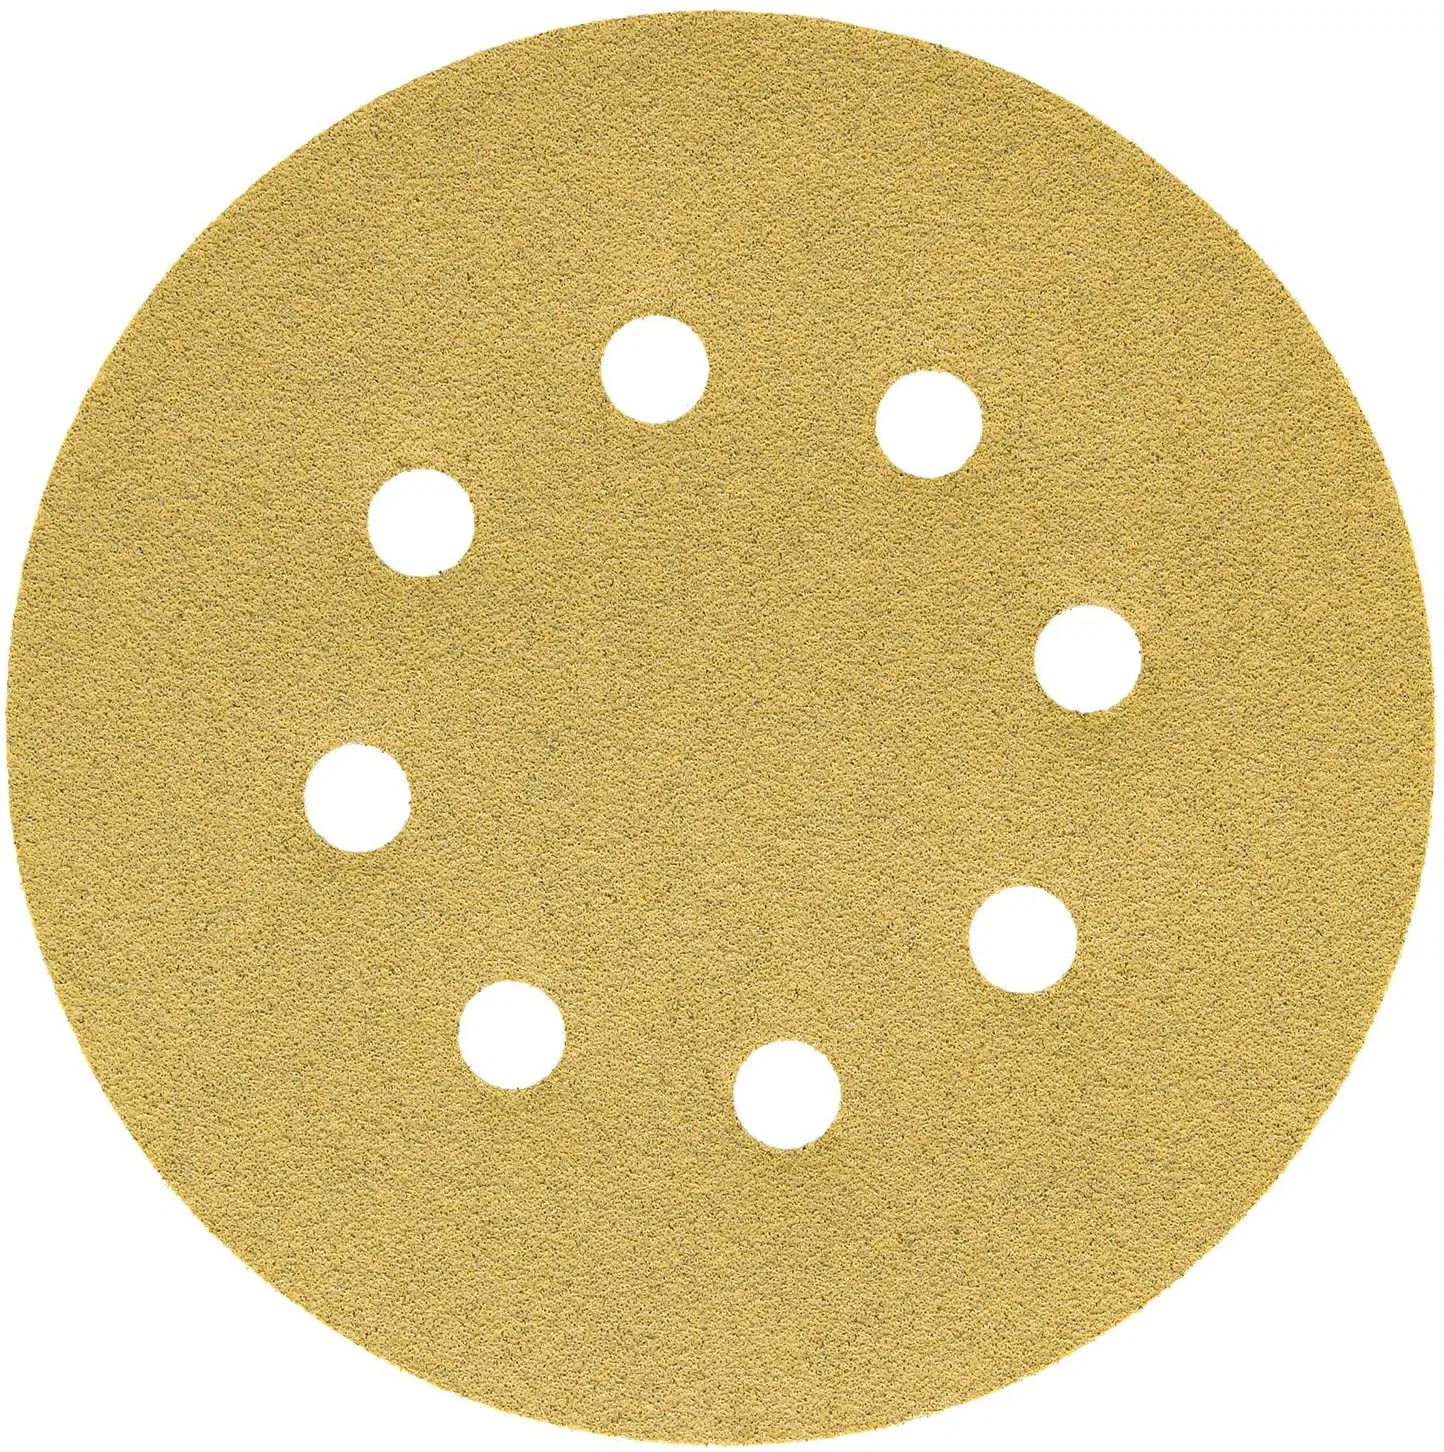 Sandpaper Yellow Sand Paper Disk Abrasive Disc 150mm 6 Holes